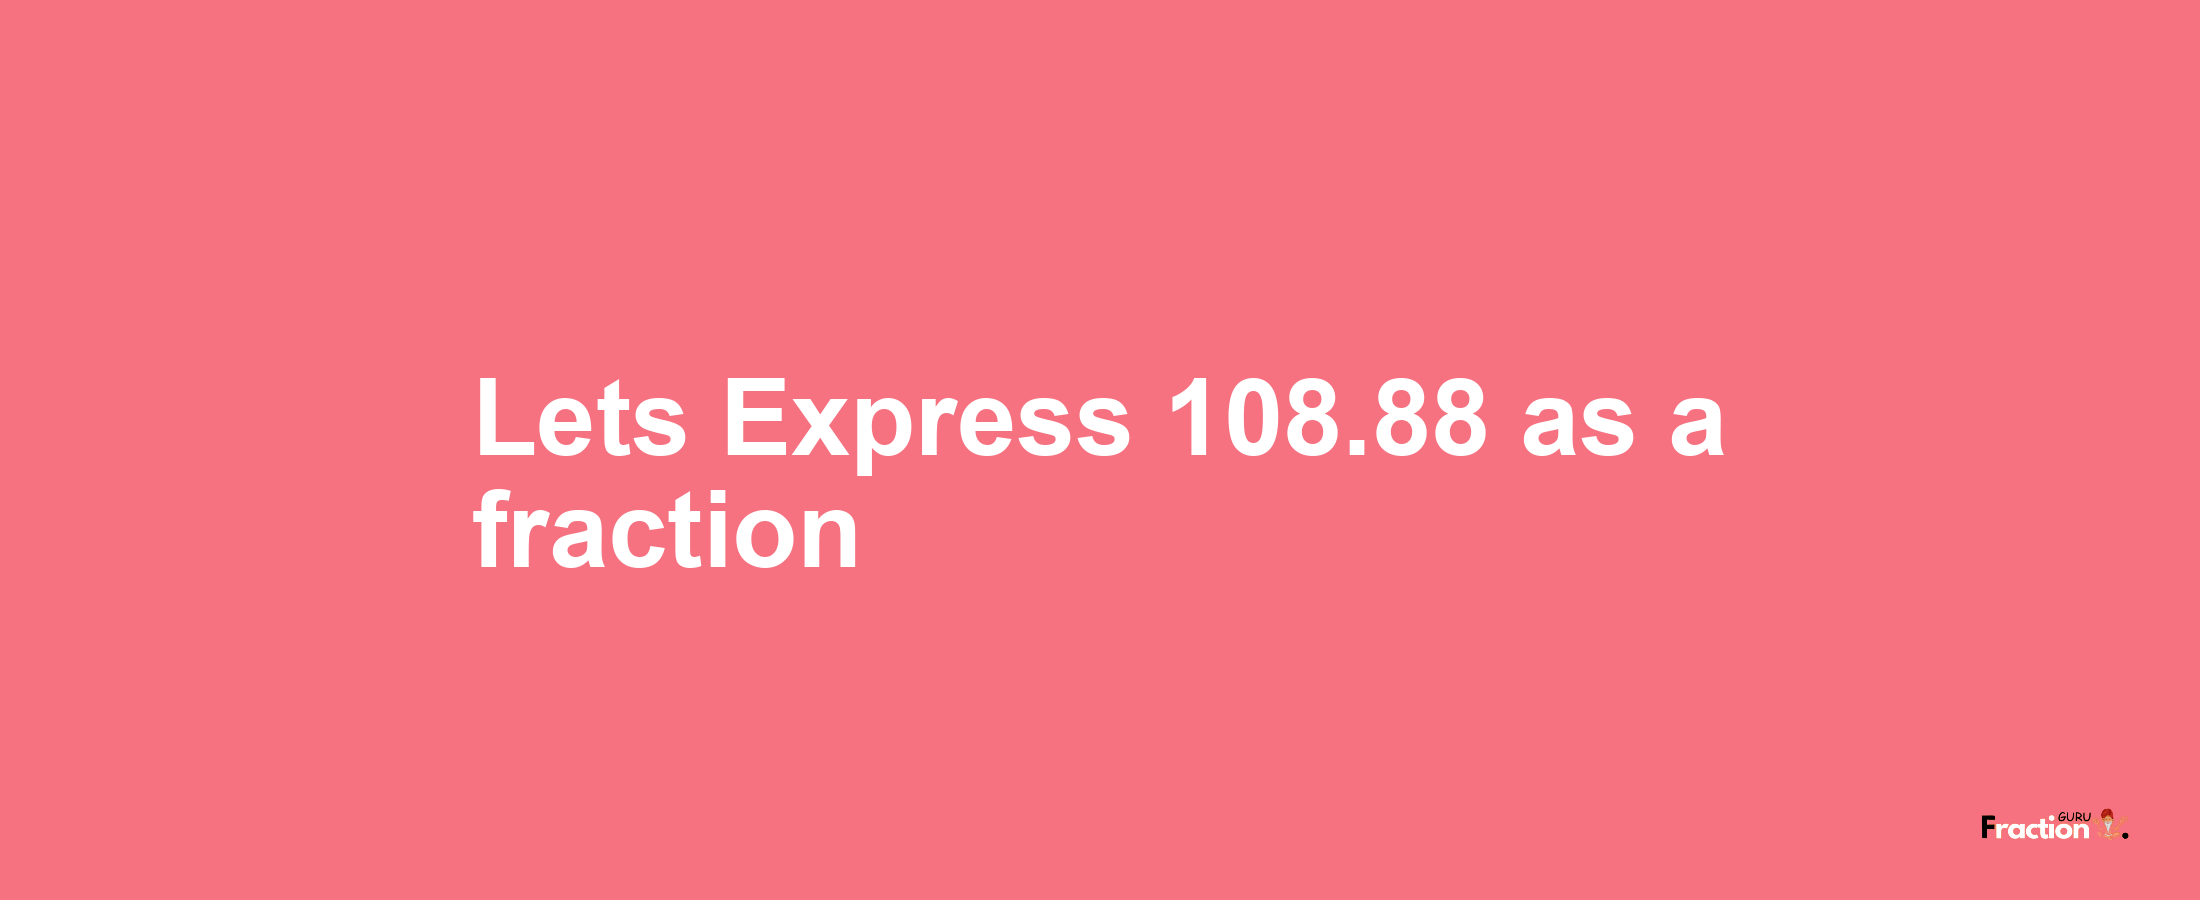 Lets Express 108.88 as afraction